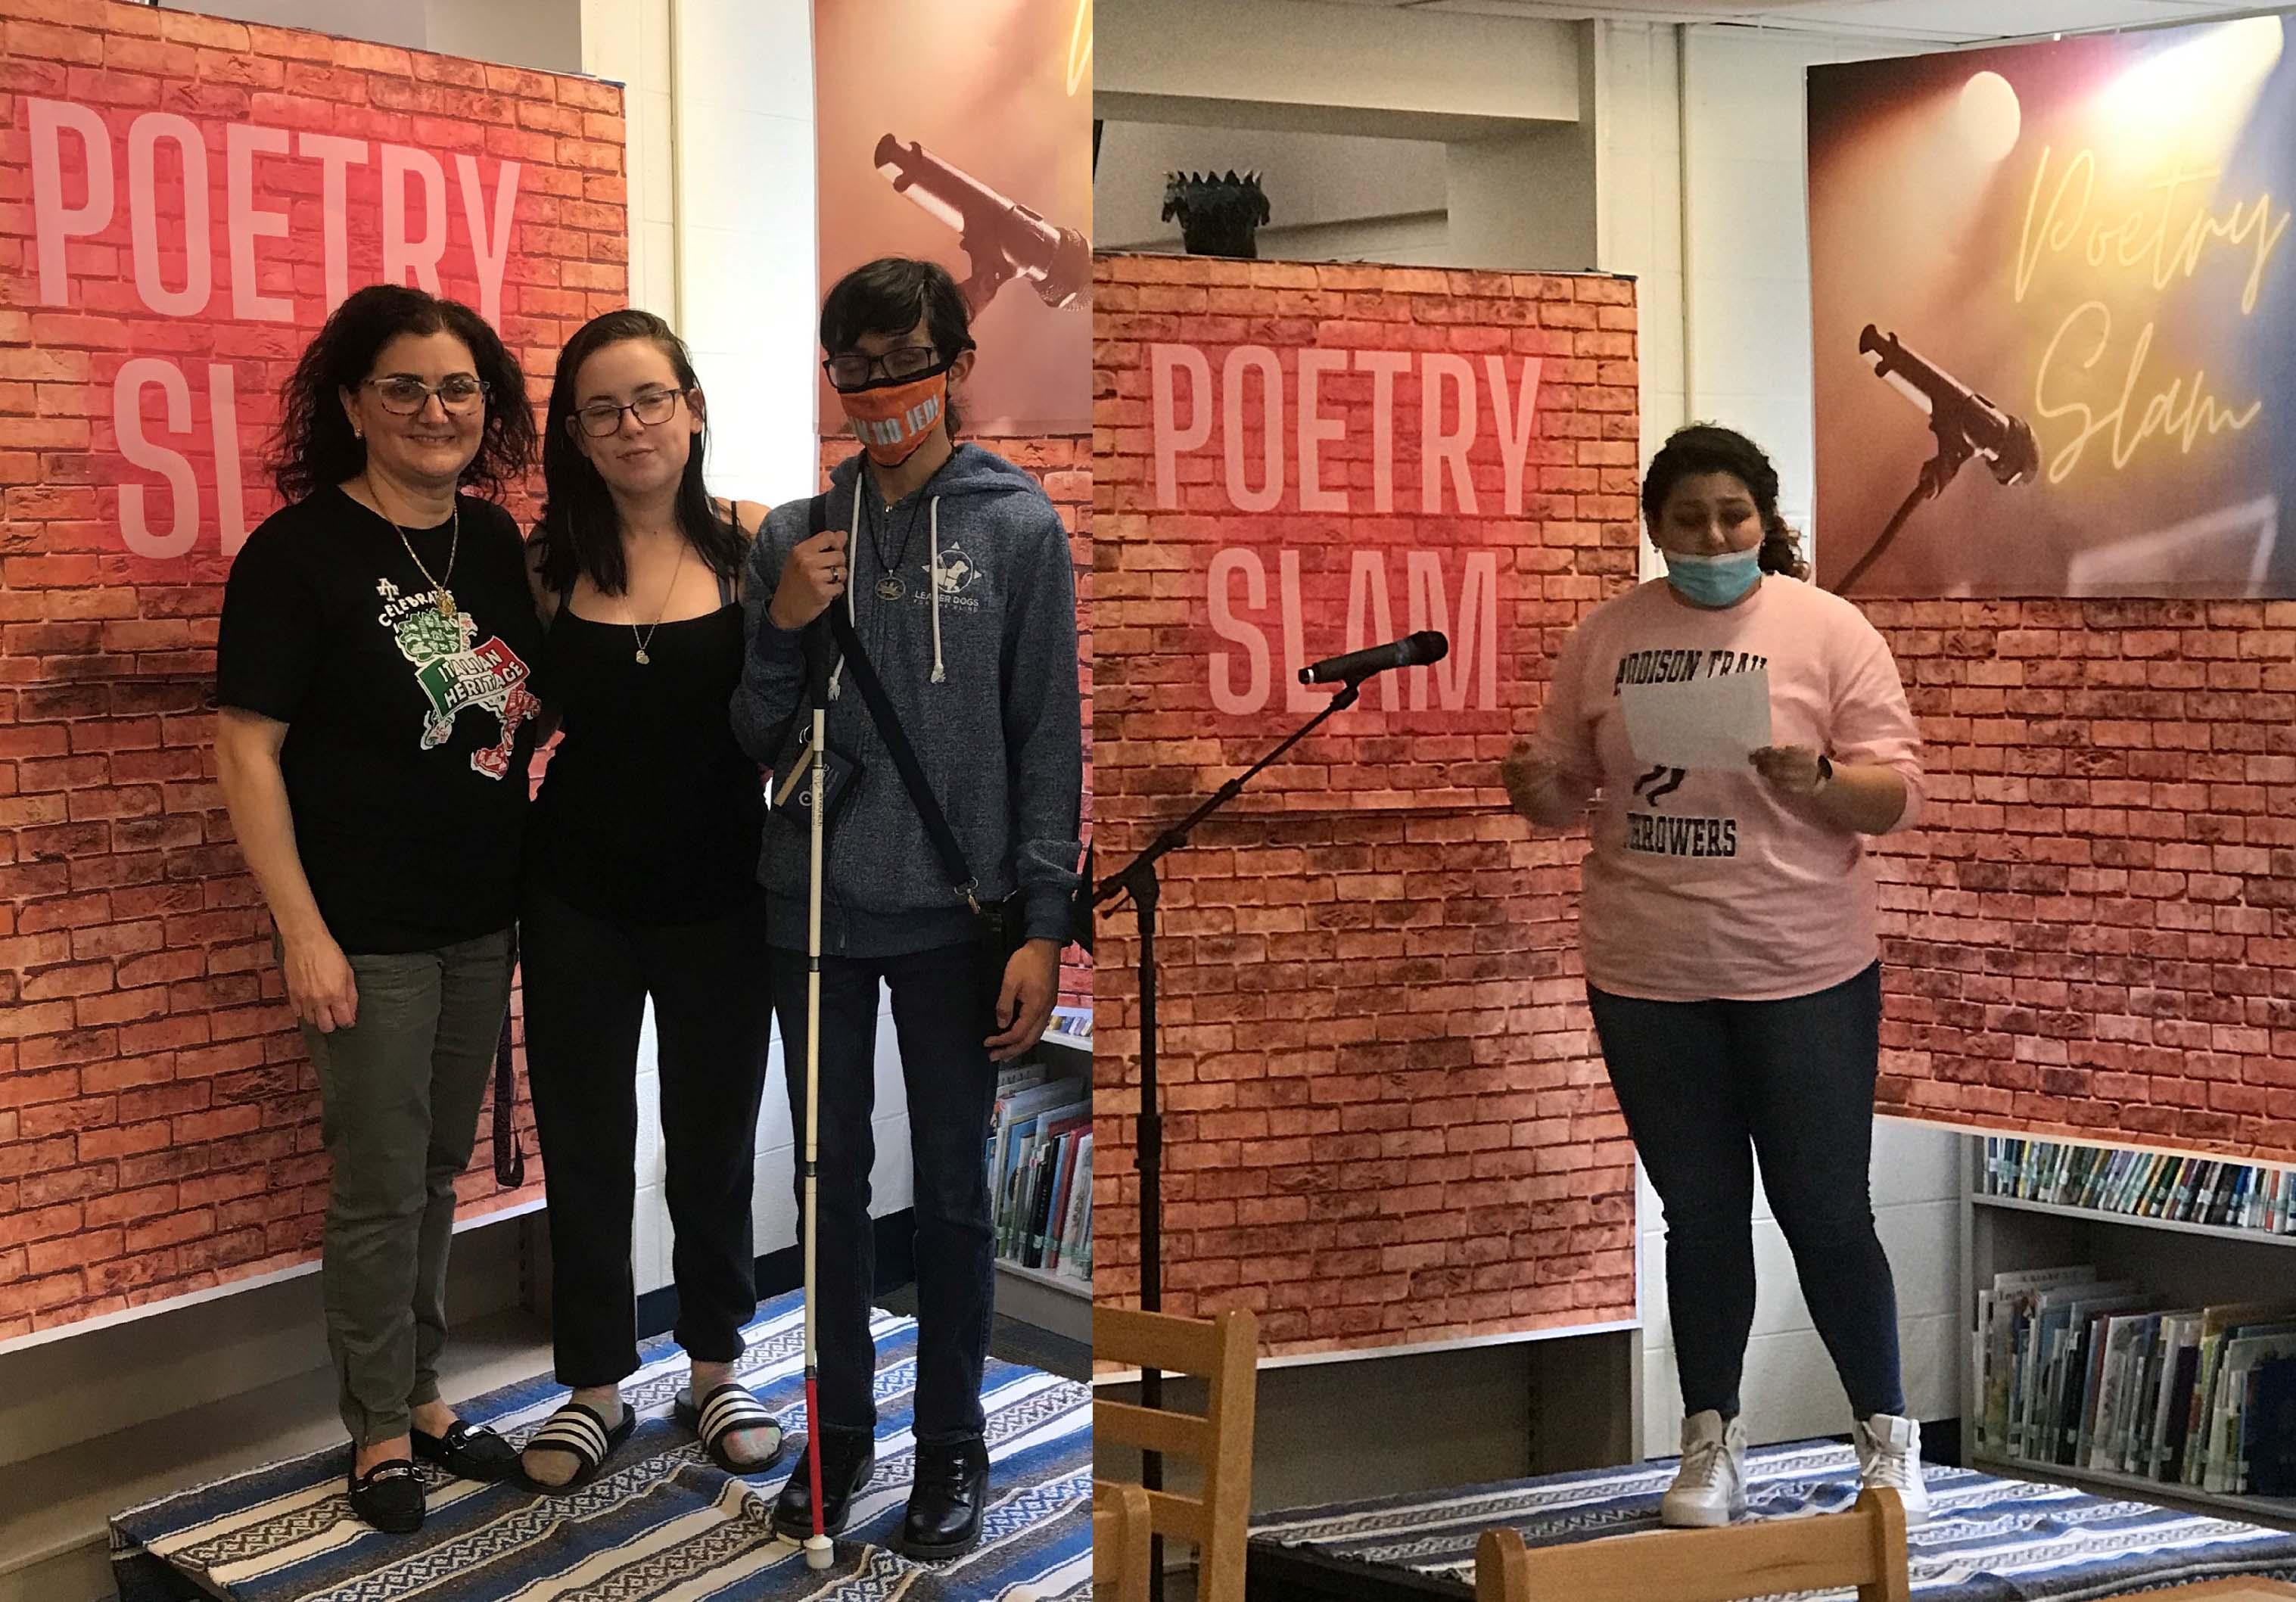 Addison Trail hosts Poetry Slam to celebrate National Poetry Month